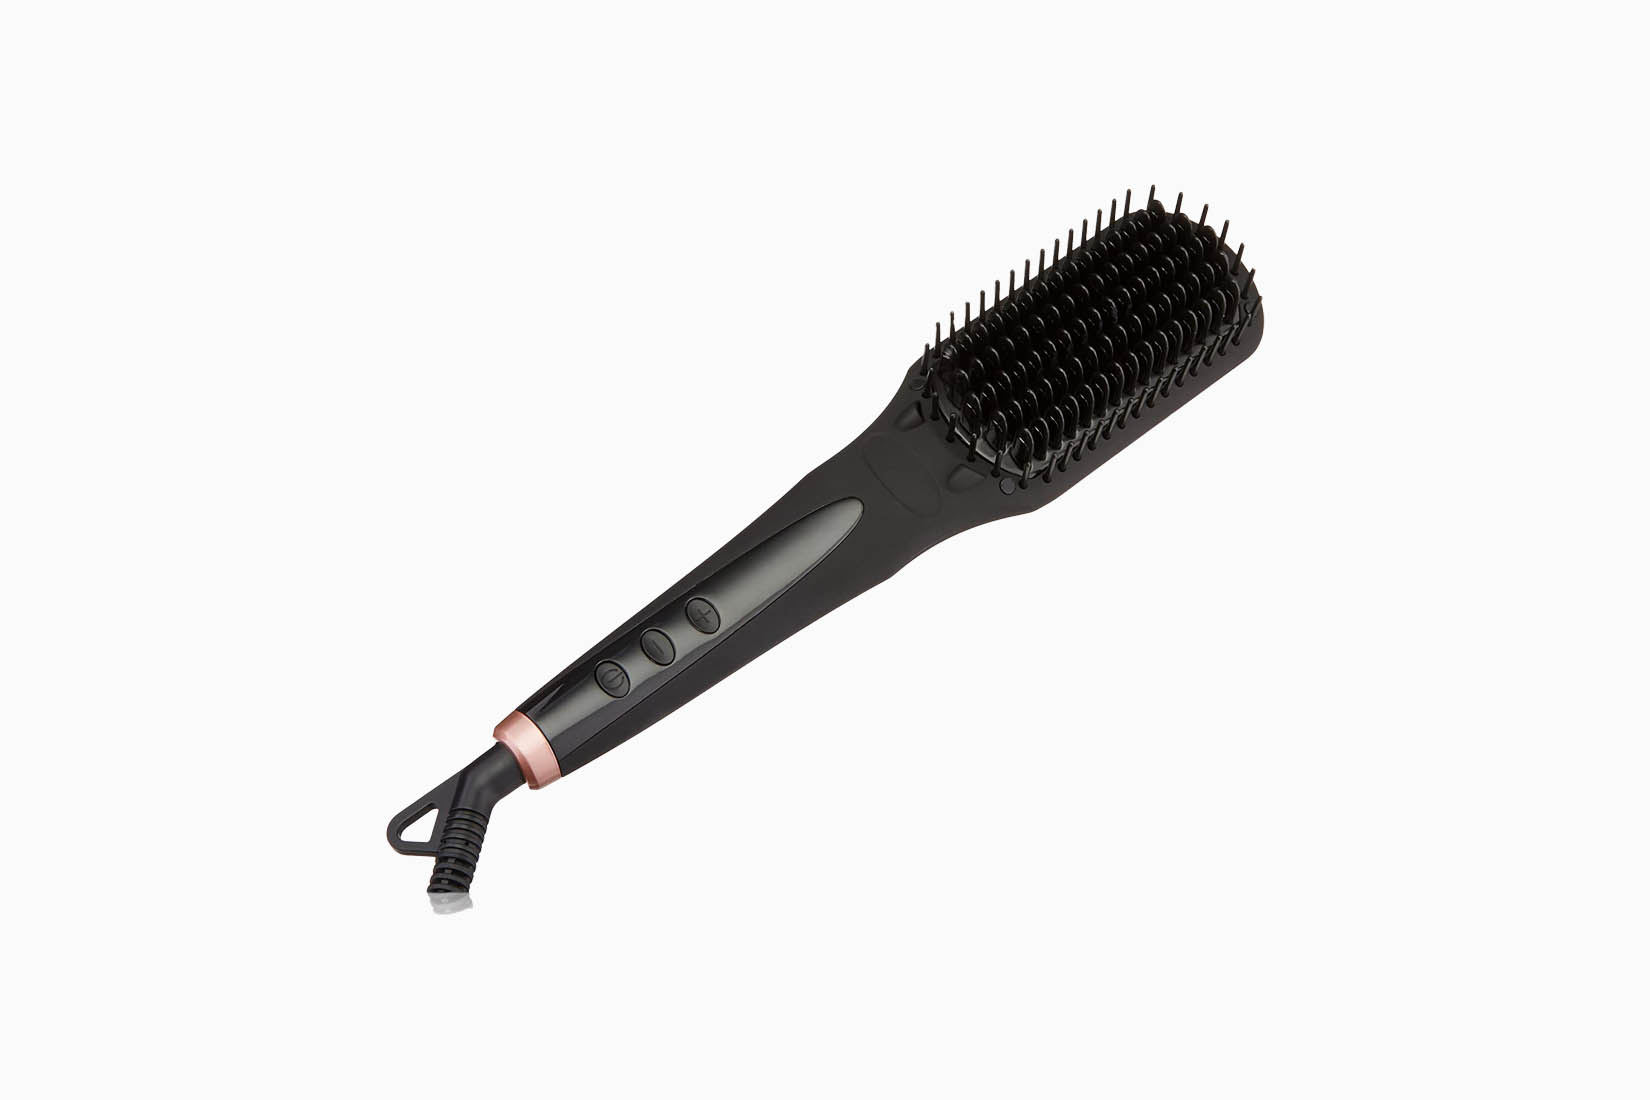 13 Best Hair Dryer Brushes For Fast Blowout & Styling (2021)